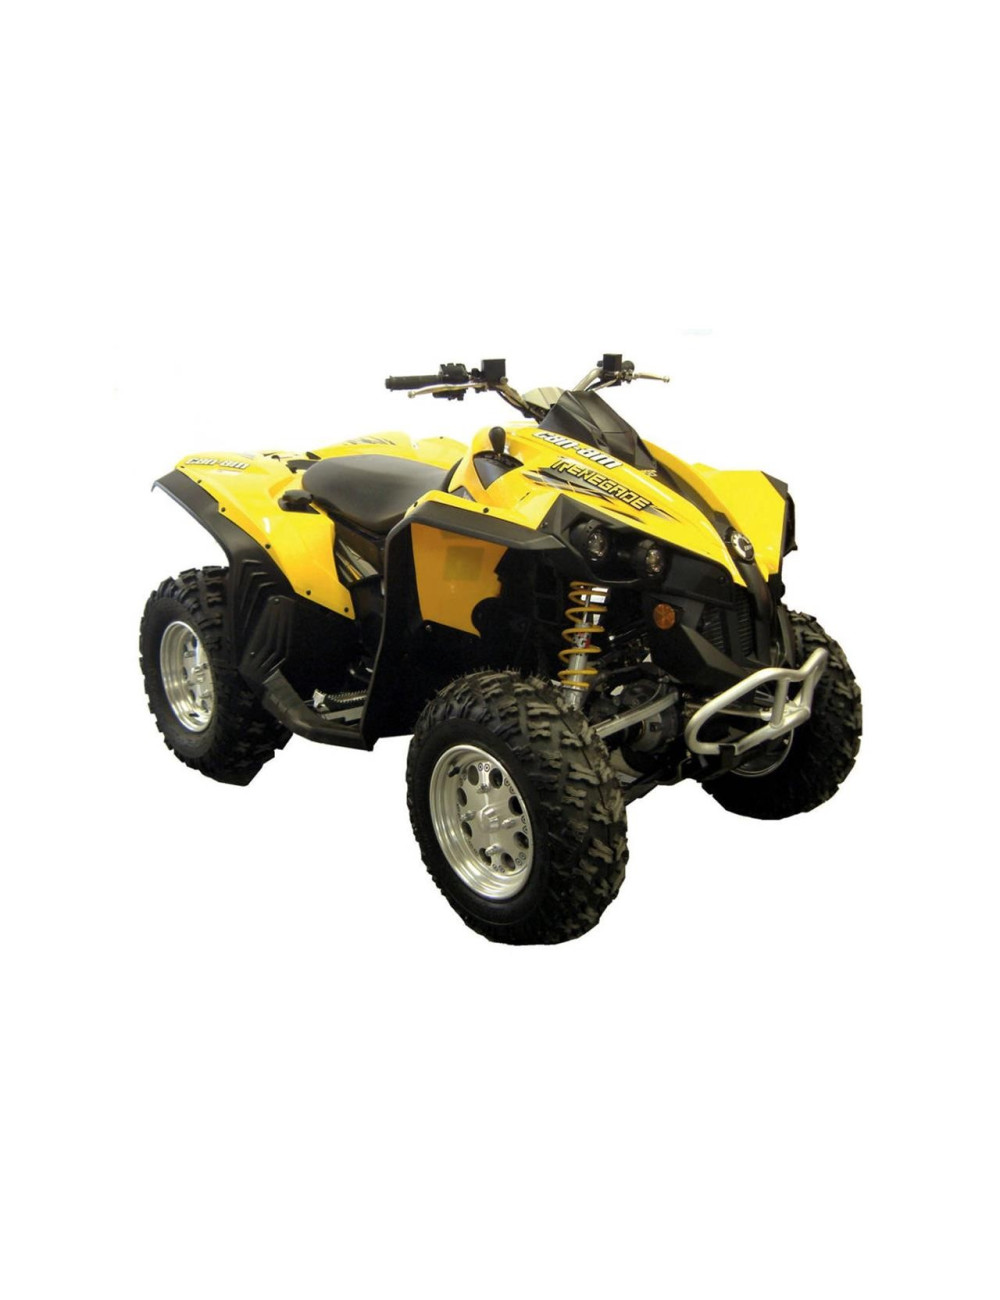 EXTENSION AILE CAN AM RENEGADE